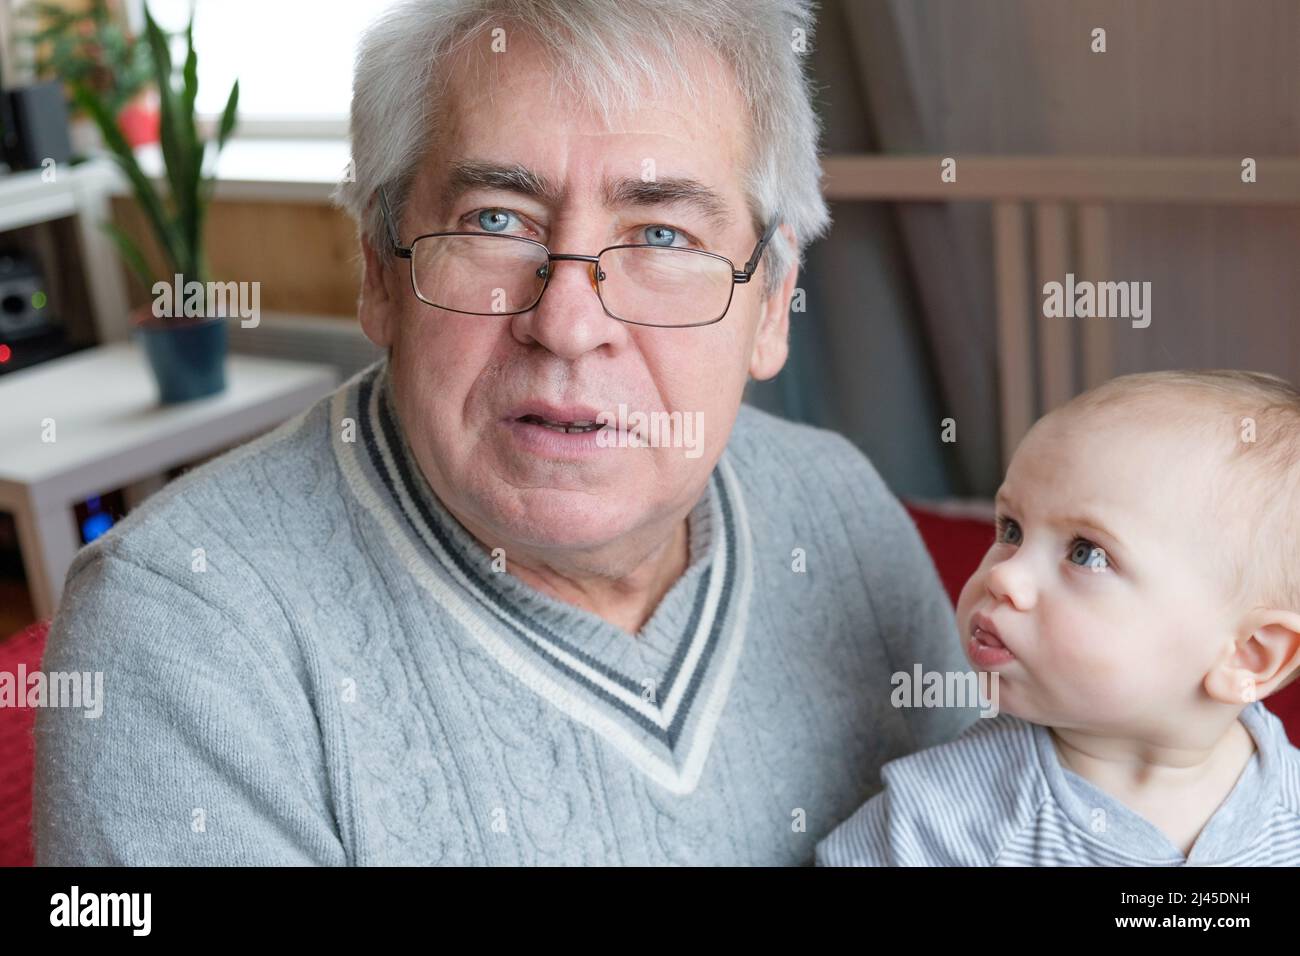 Family Relations of Elderly 60s Male and Baby Girl. Happy Old Man Holds a little Child on Hands. Caucasian Grandchild and Grandfather. Family Time Stock Photo